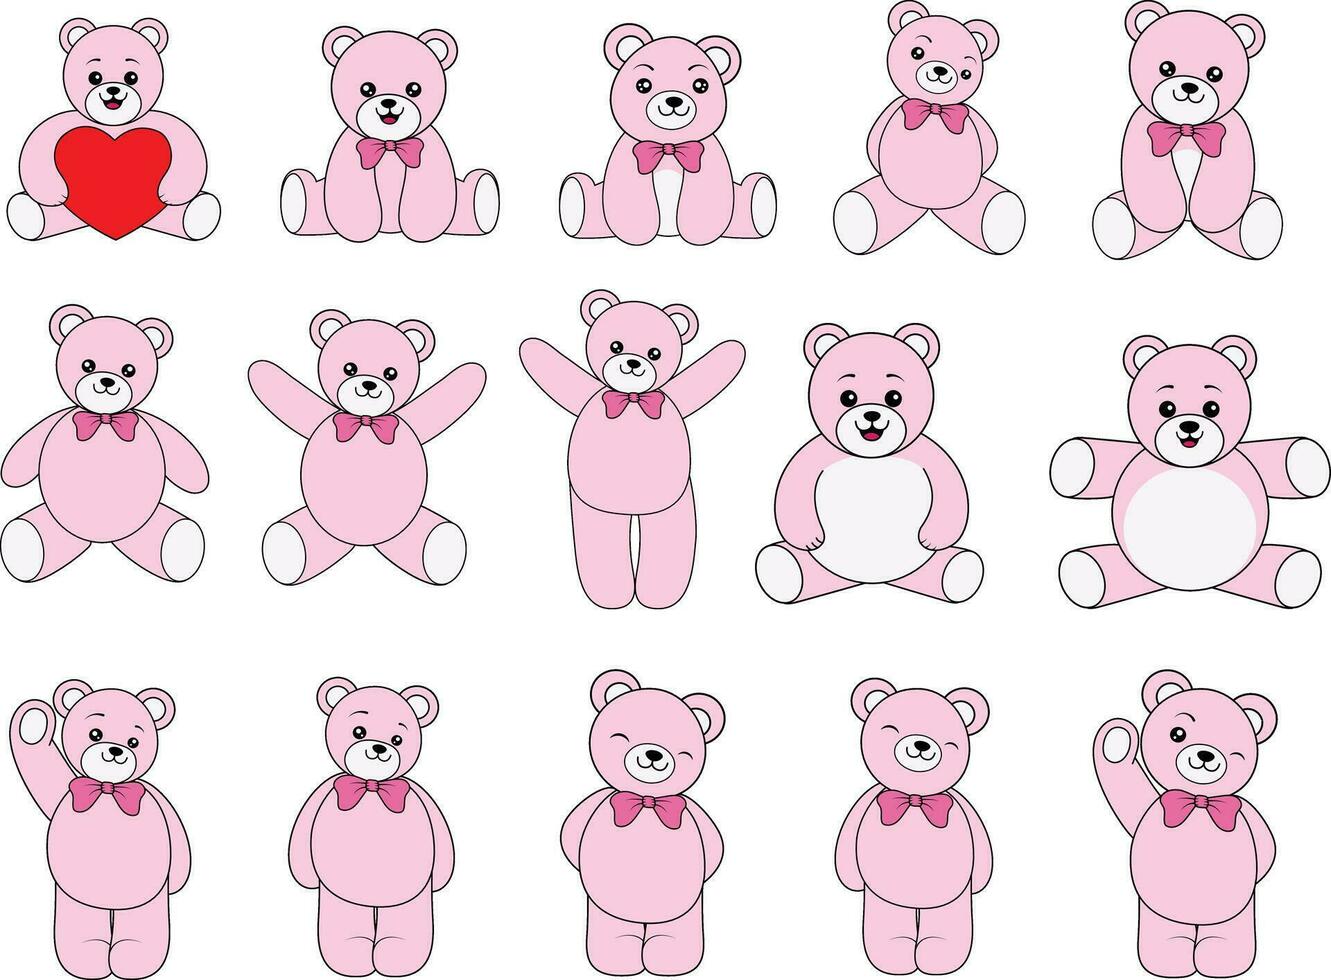 Set of 15 Teddy bears, Collection of 15 Adorable Bears vector